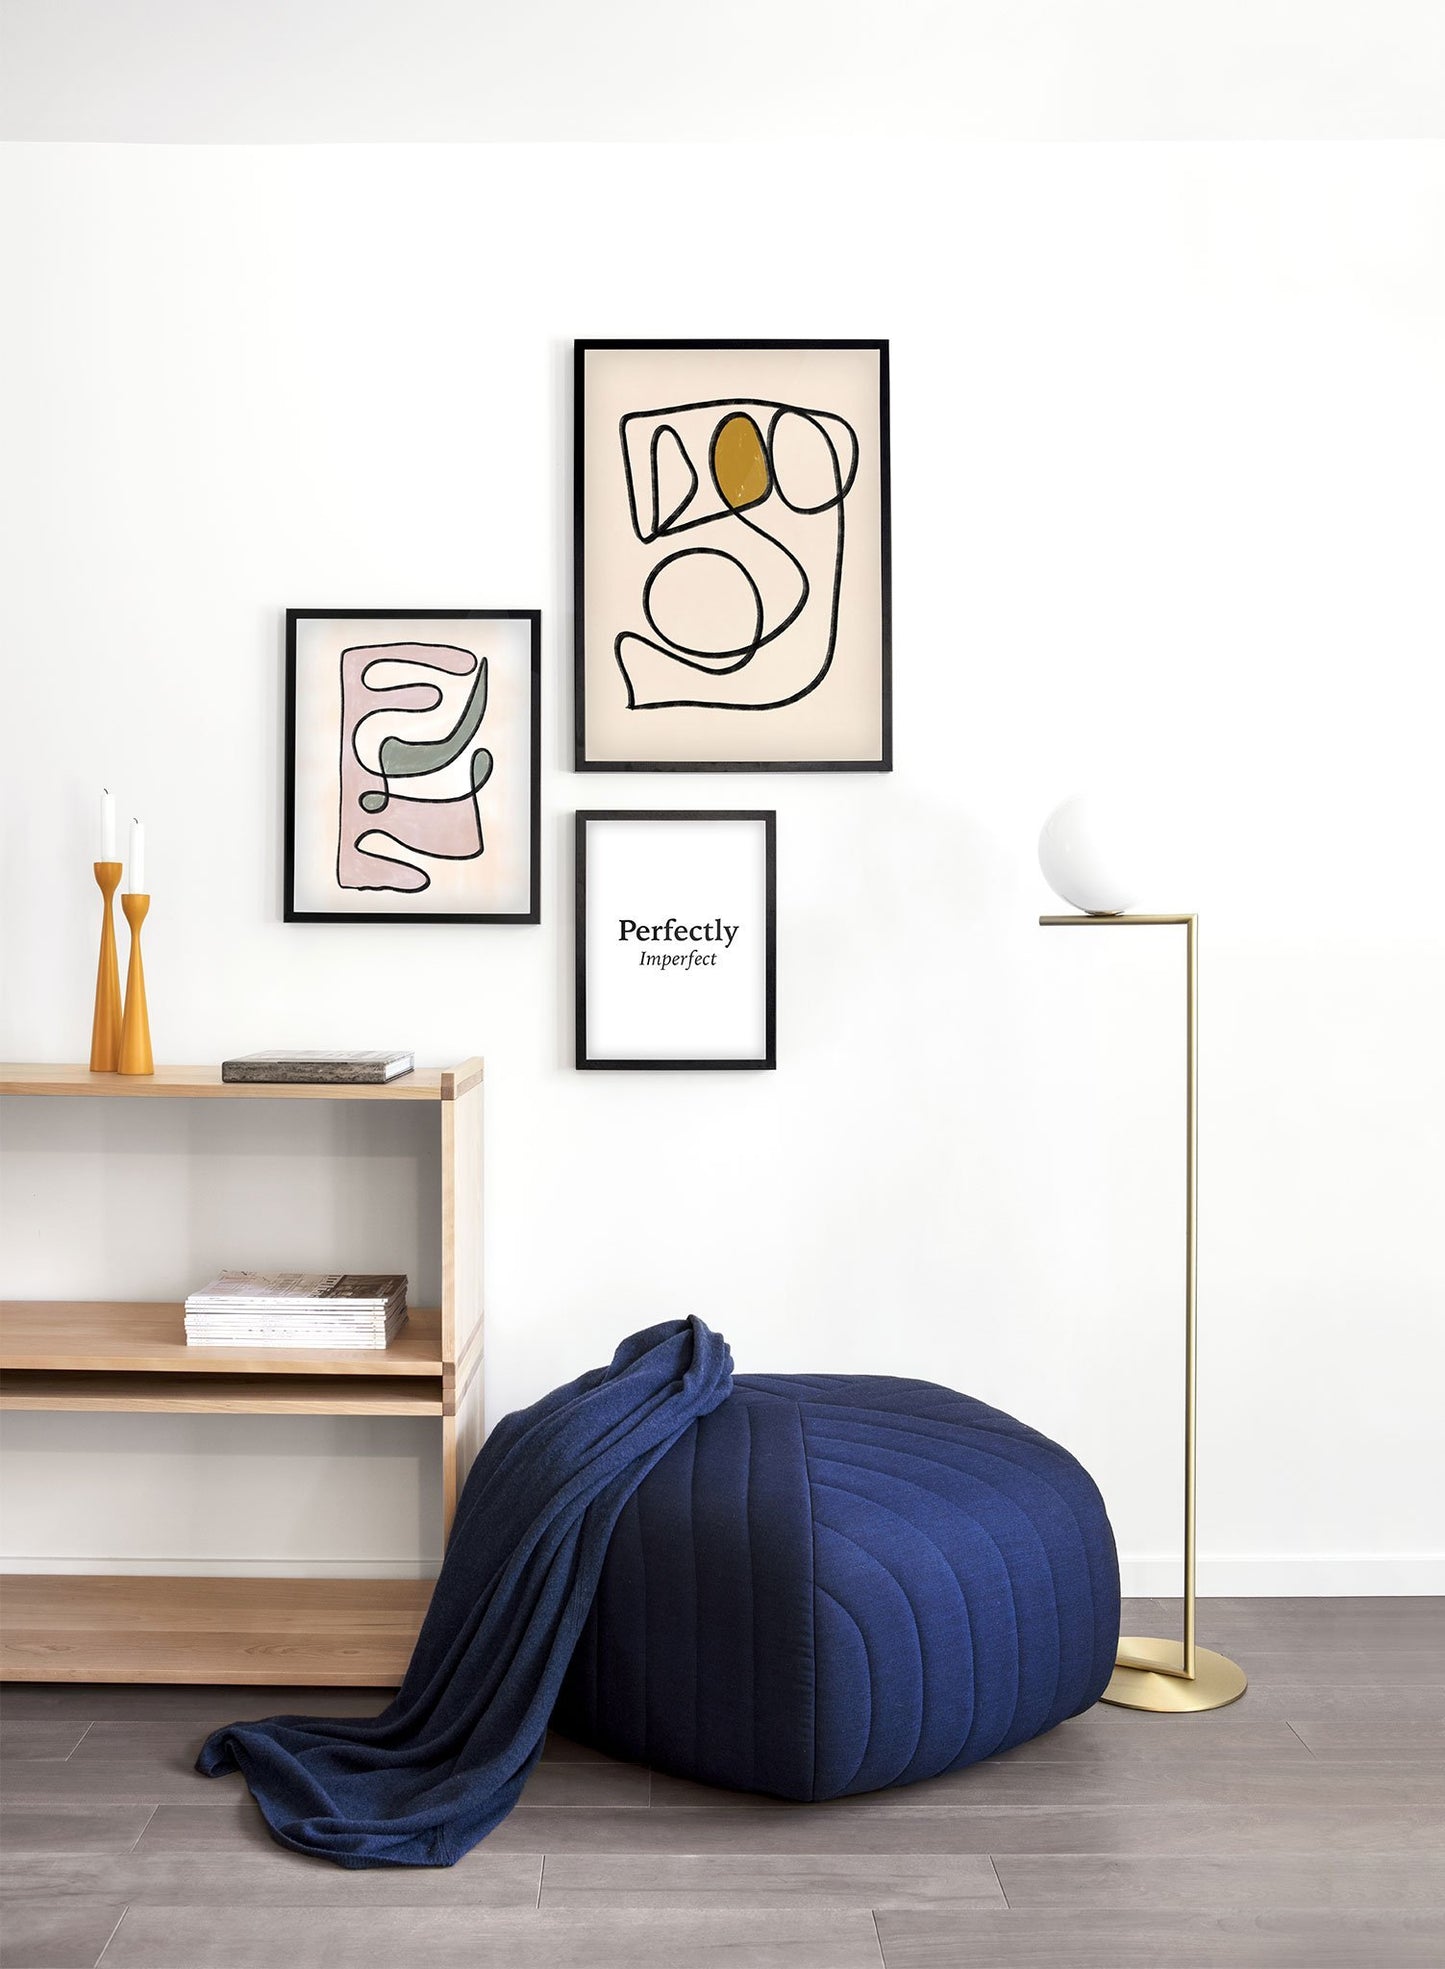 Modern minimalist poster by Opposite Wall with abstract design poster of Contortionist by Toffie Affichiste - Gallery Wall Trio - Entryway